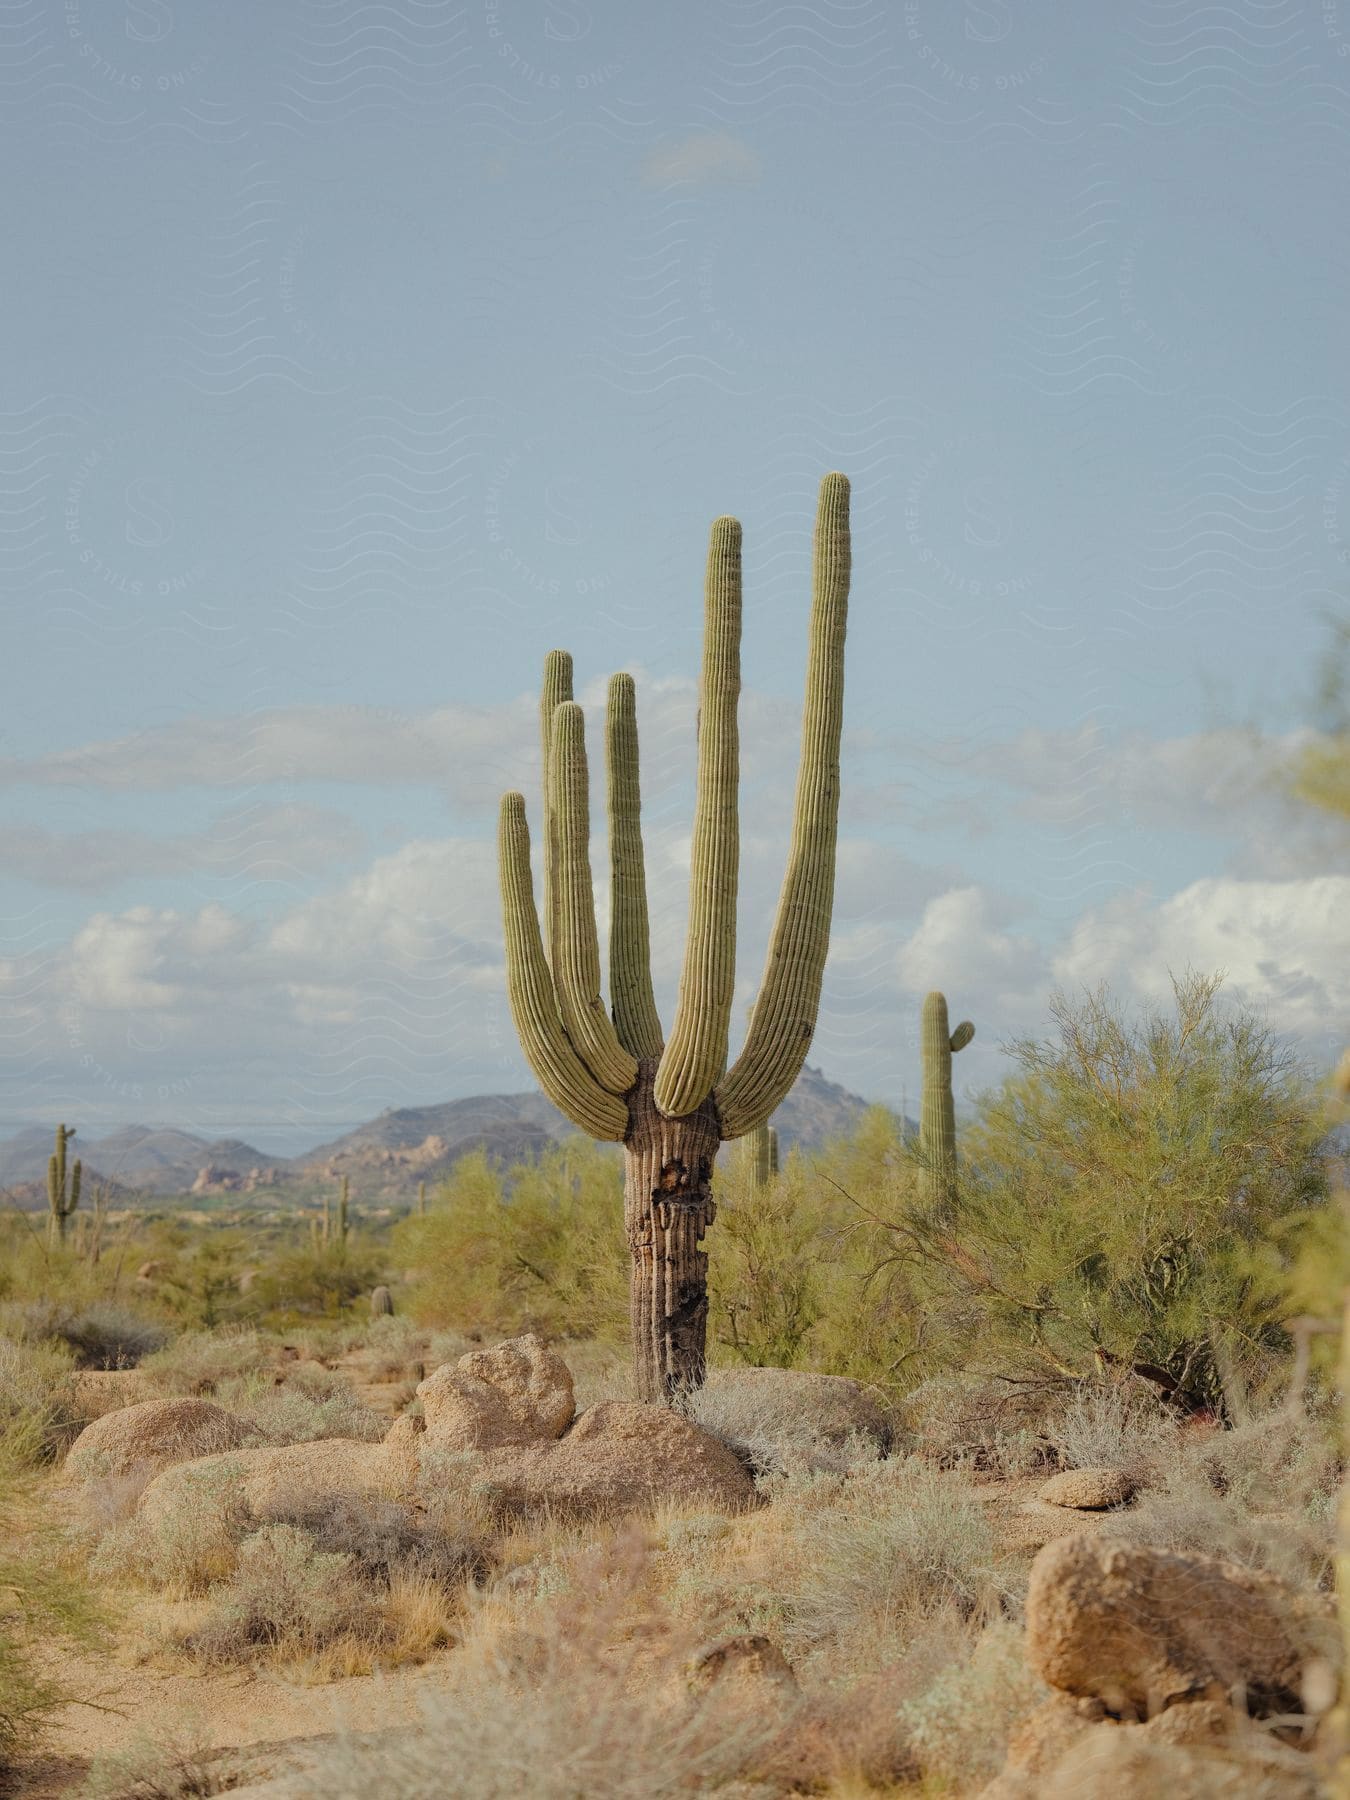 A solitary saguaro cactus stands tall in the vast desert with majestic mountains in the distance